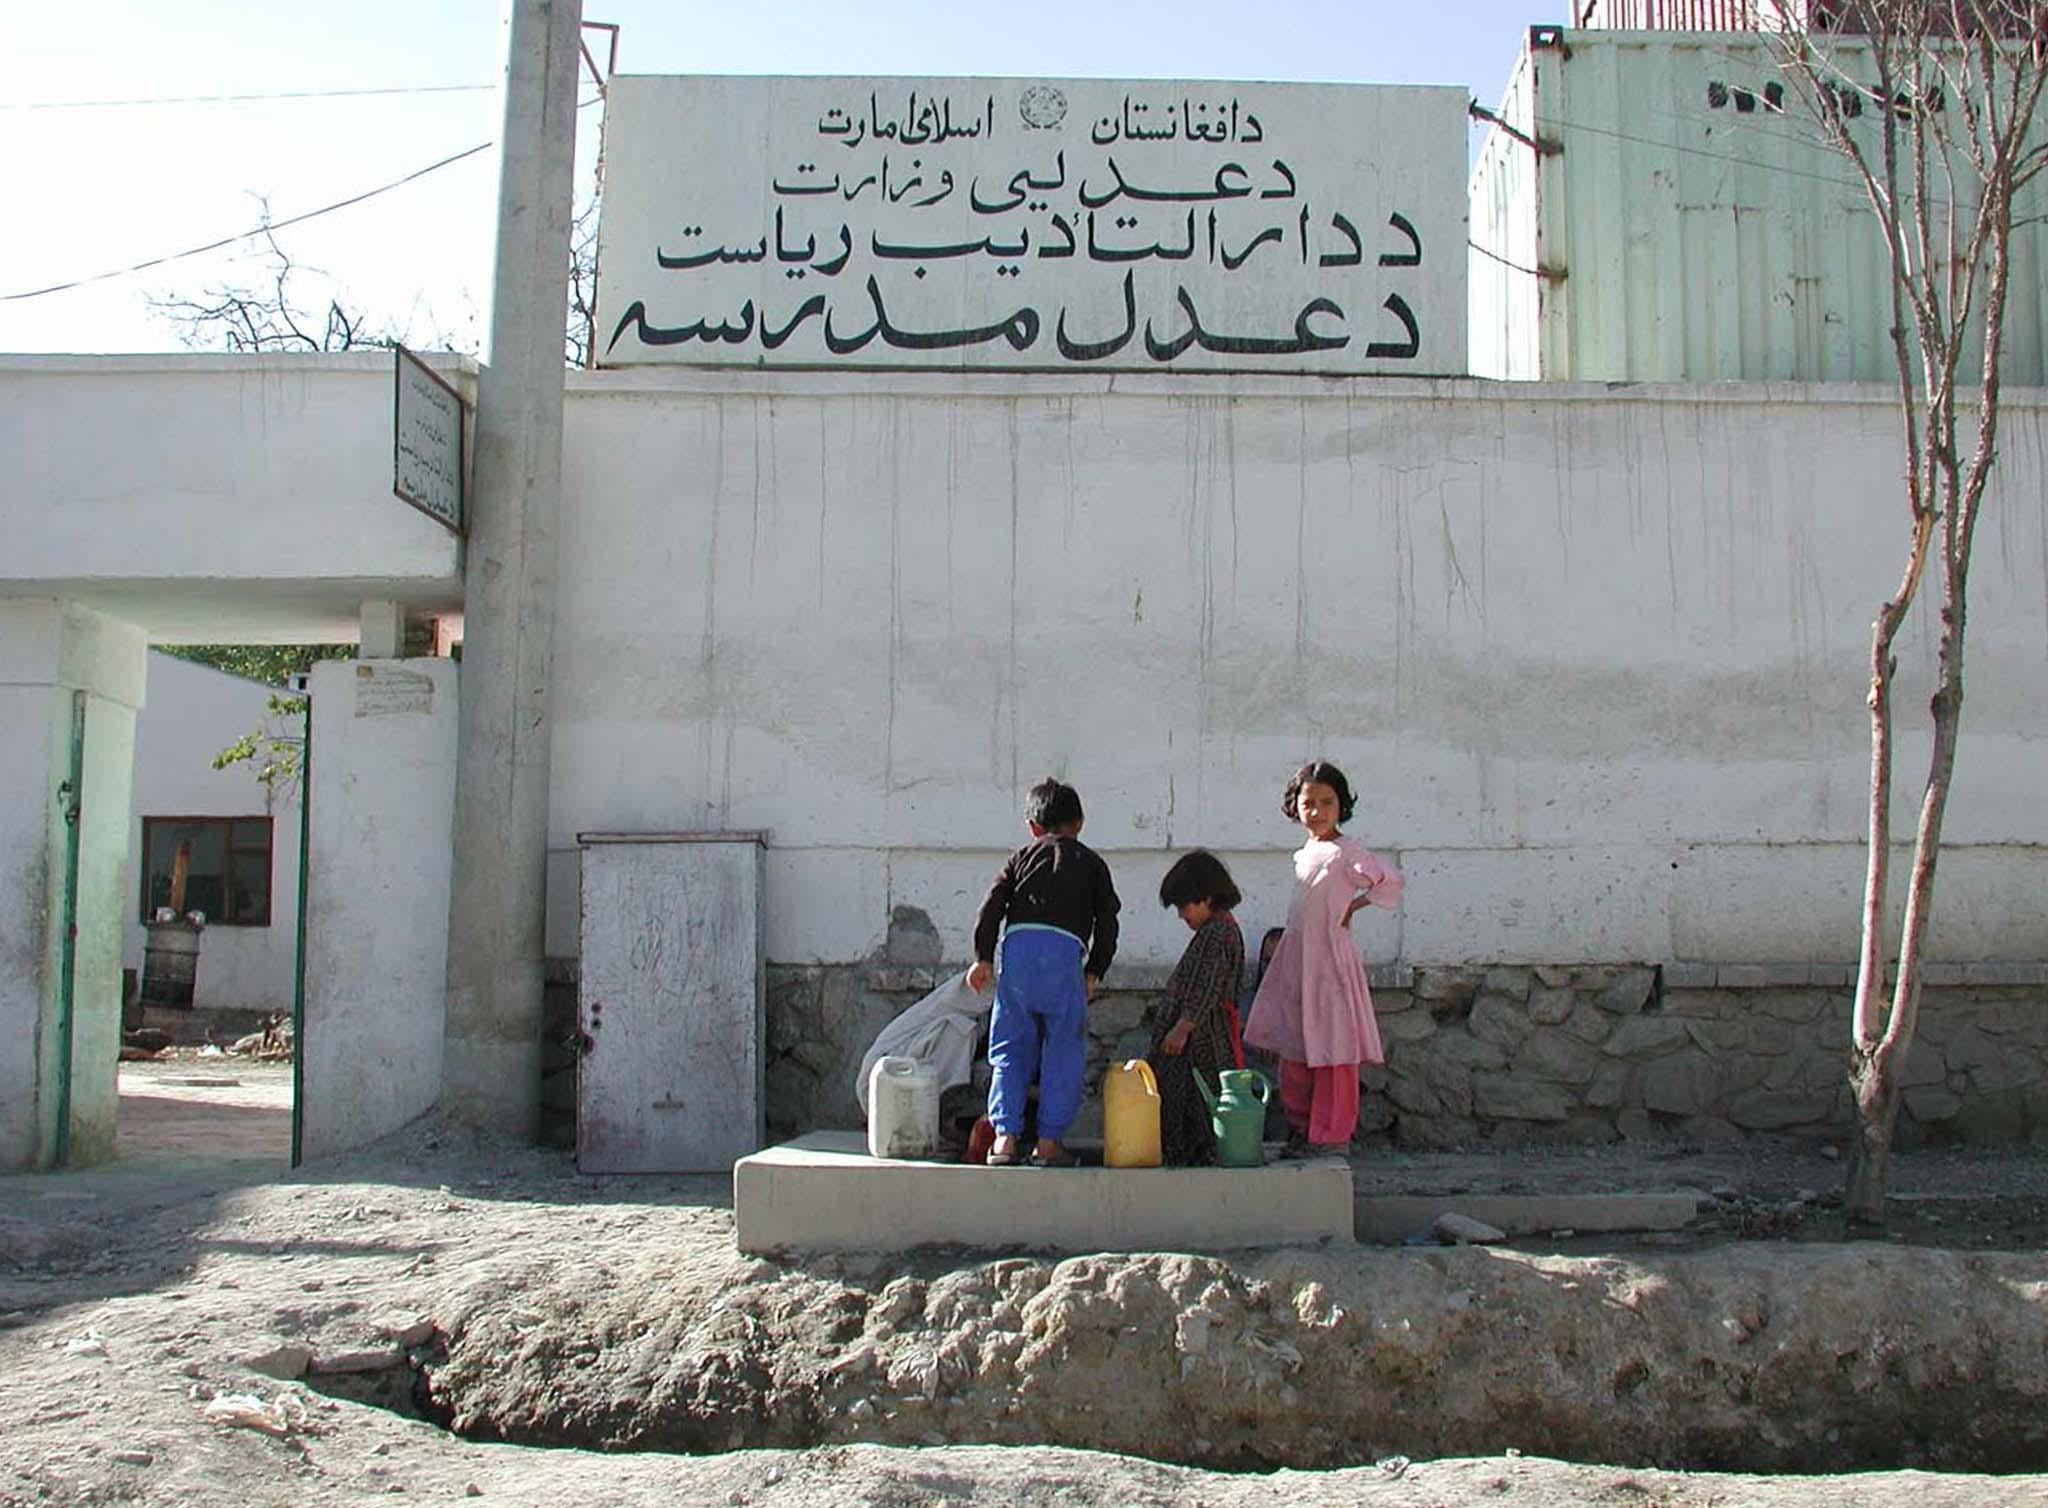 Afghan children collect water from a hand-pump well outside the detention center where eight foreign nationals are believed to be held by the ruling Taliban September 29, 2001. 